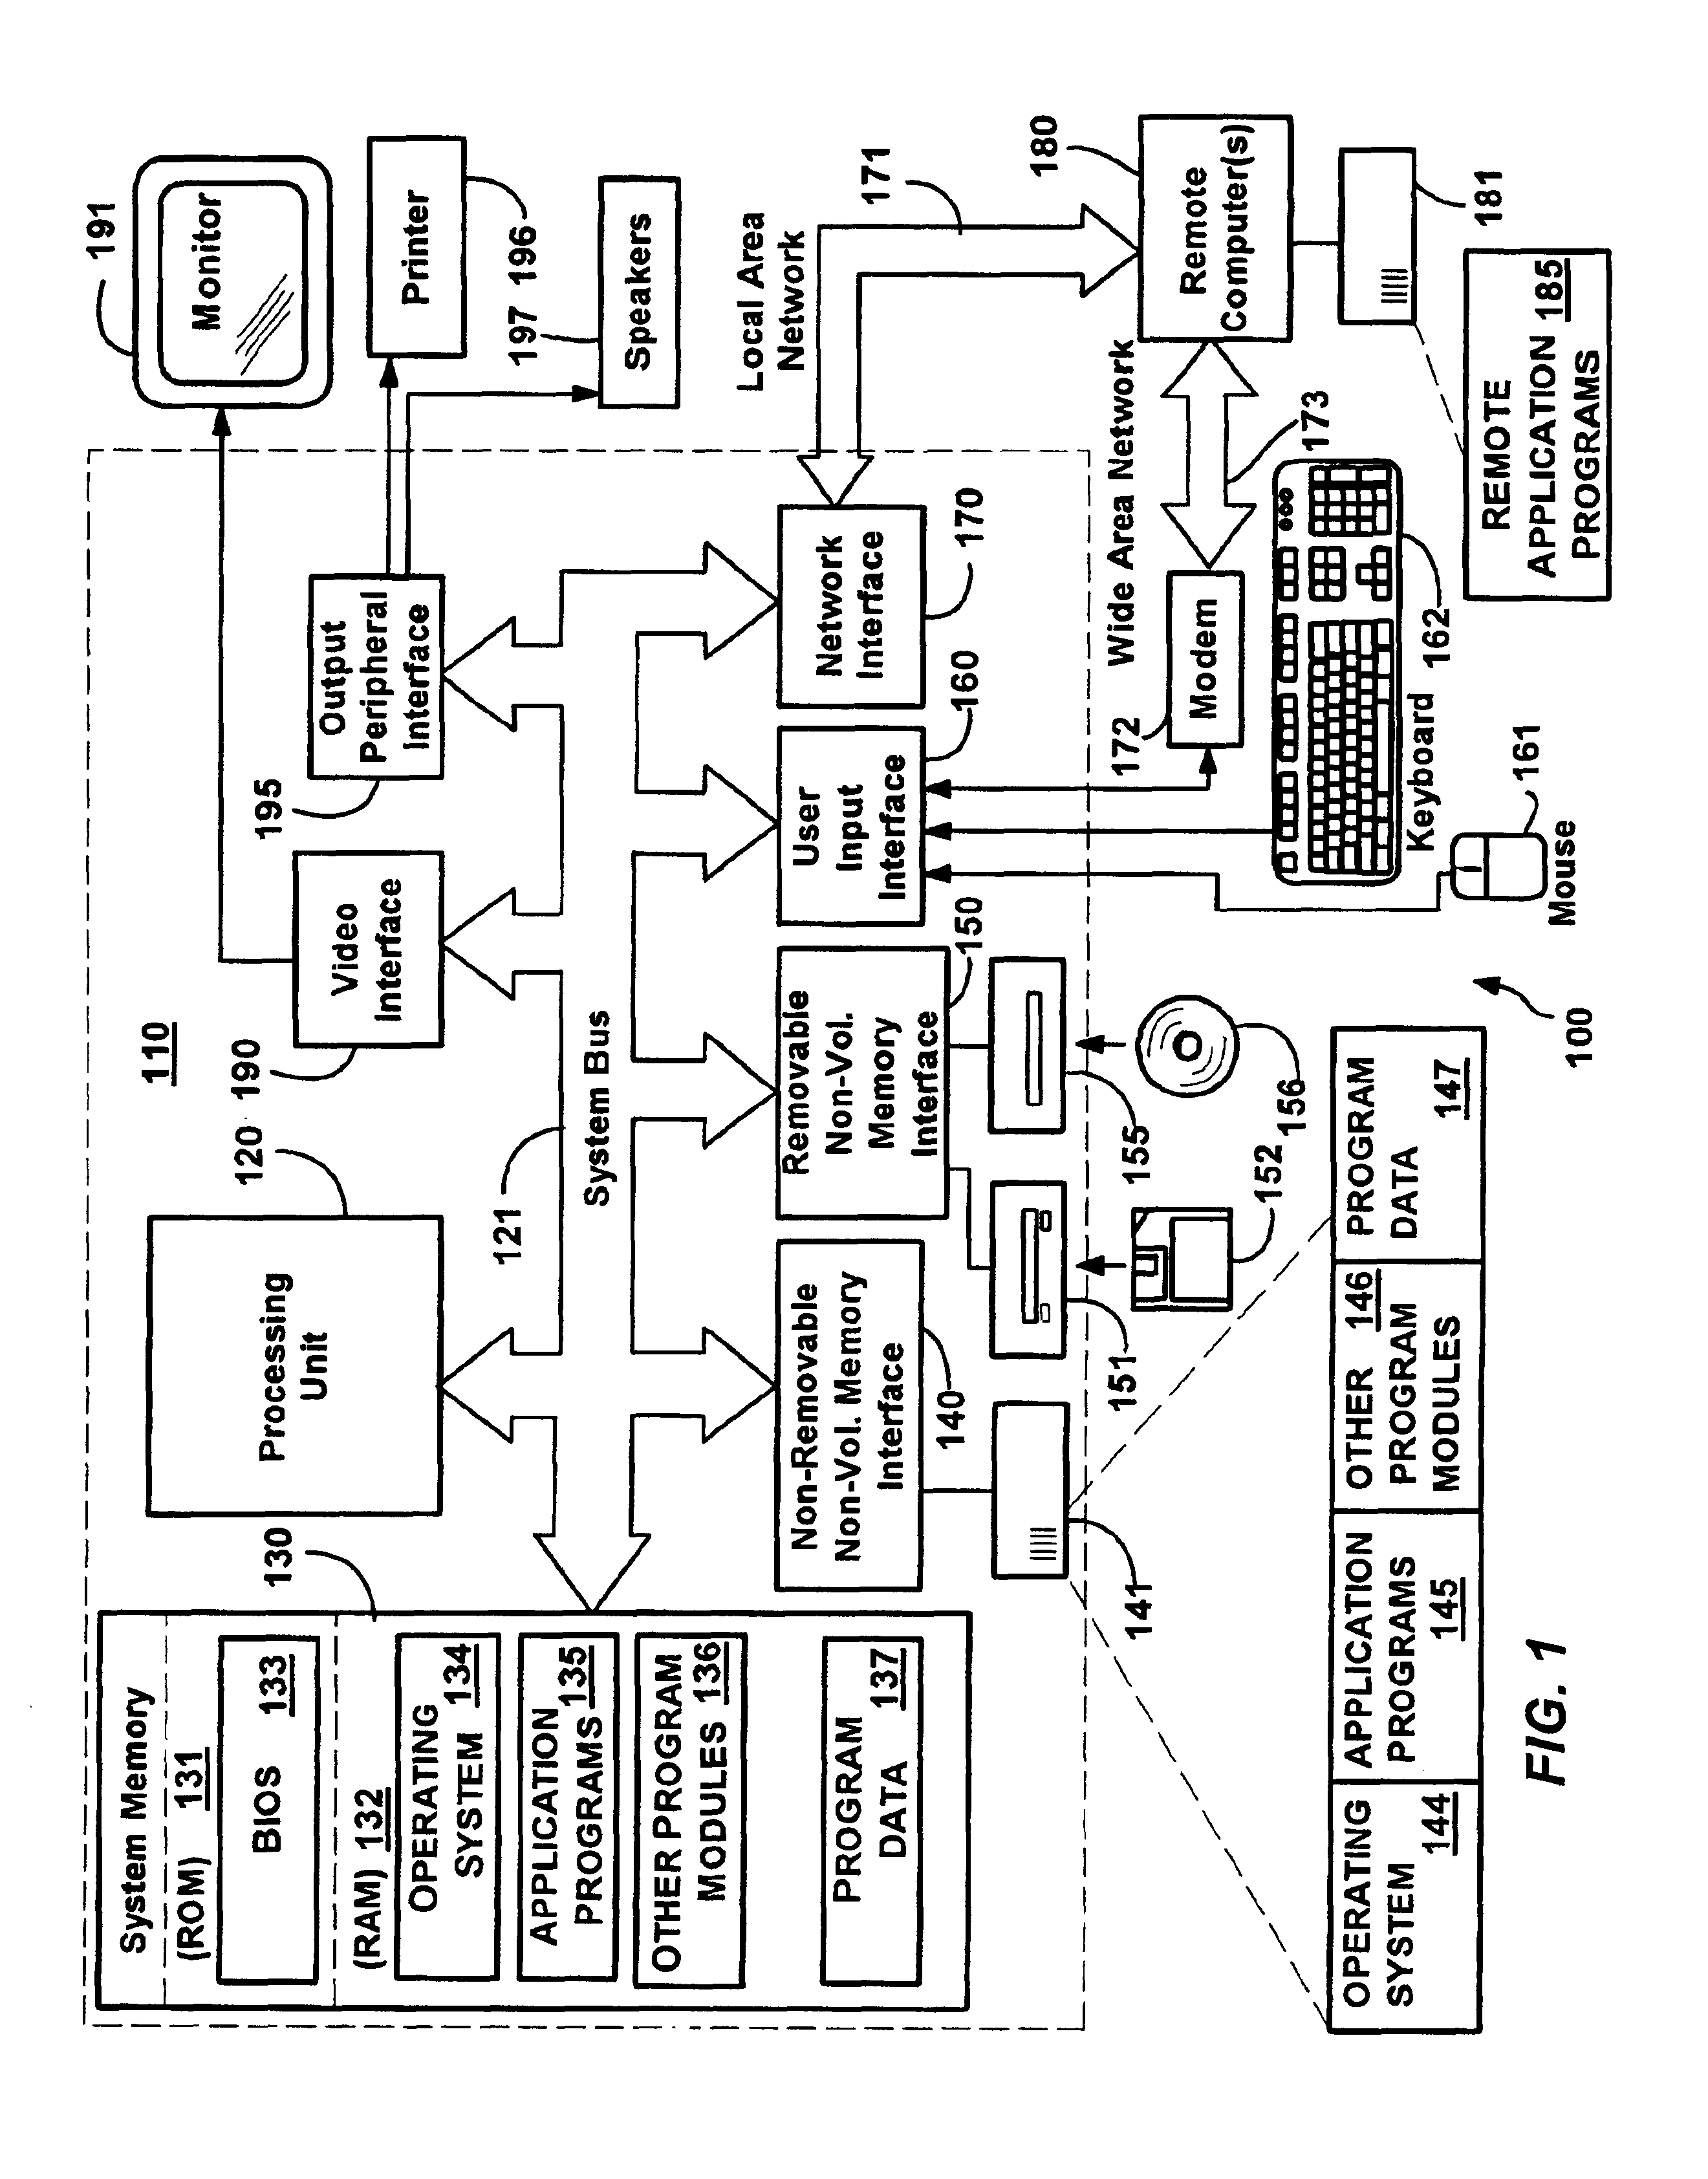 Fast data decoder that operates with reduced output buffer bounds checking